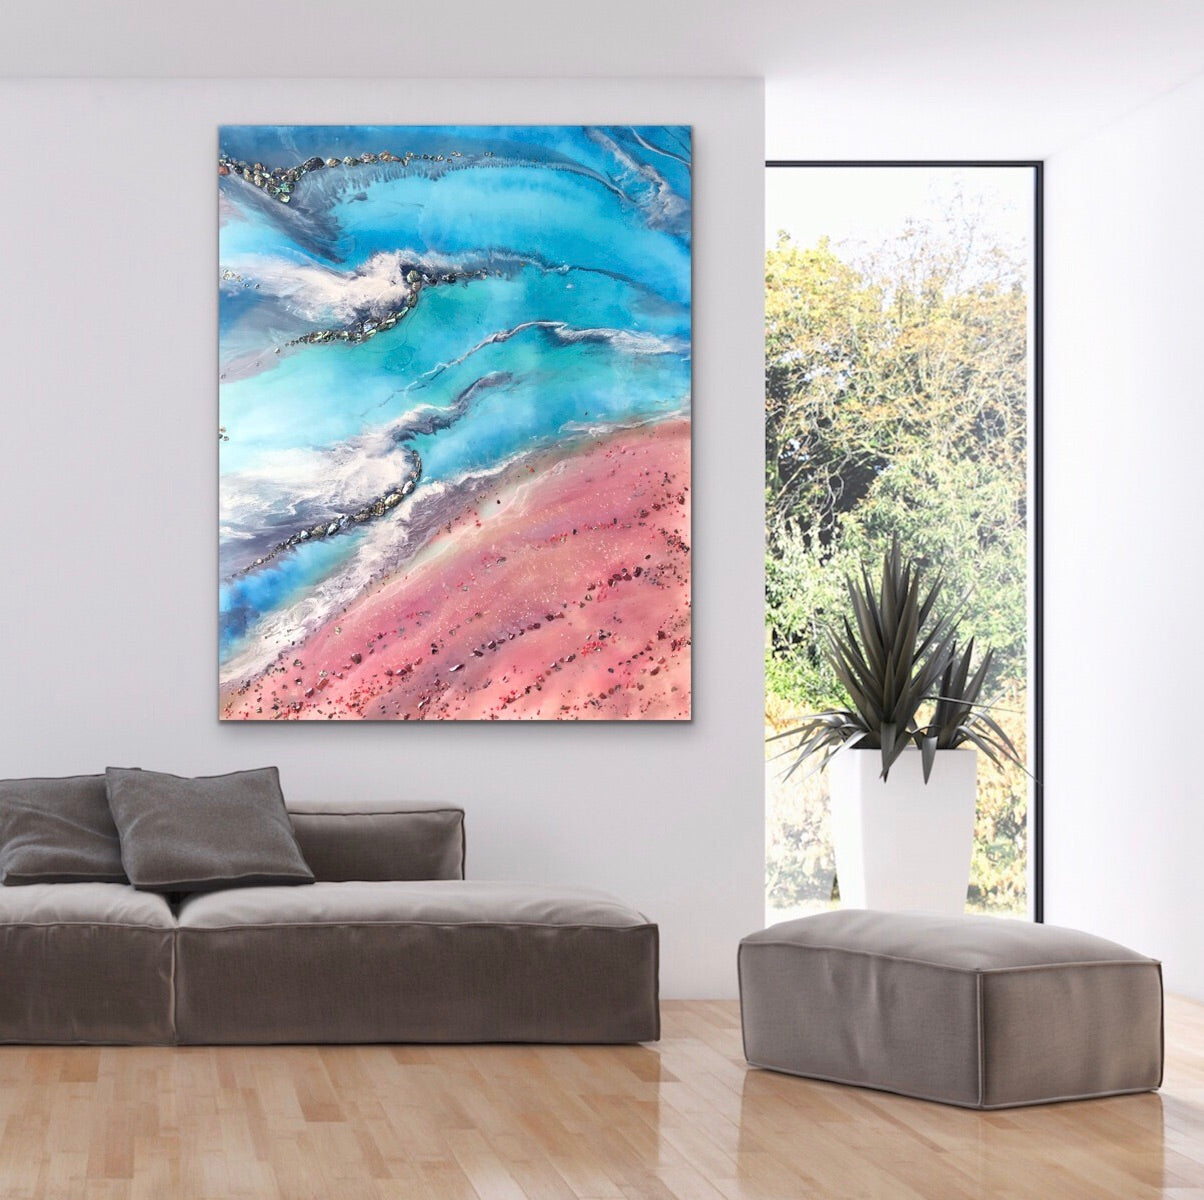 Teal and Pink Ocean Painting. Abstract Seascape Resin Artwork 3 Azure Coastline. Ocean. Original with Abalone Shells Coral 120x150cm.